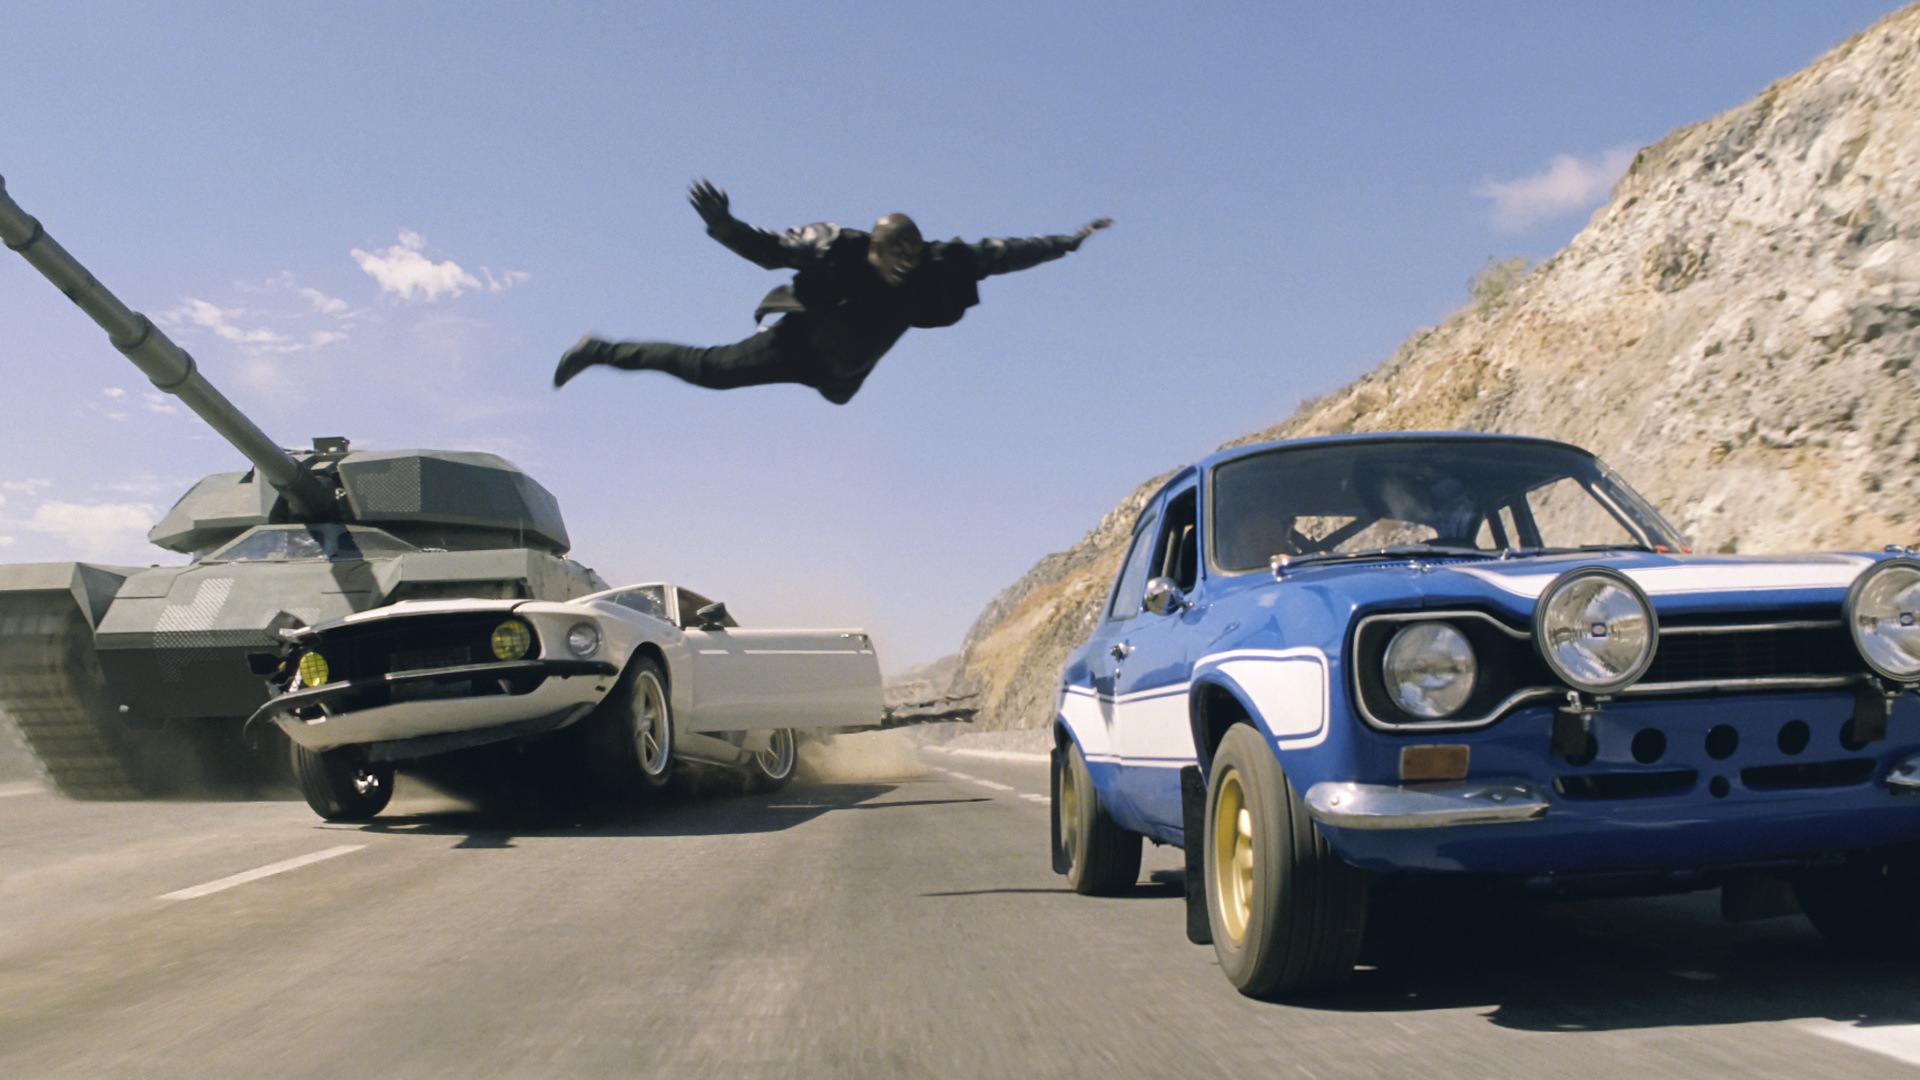 Fast And Furious 6 HD movie wallpapers #14 - 1920x1080